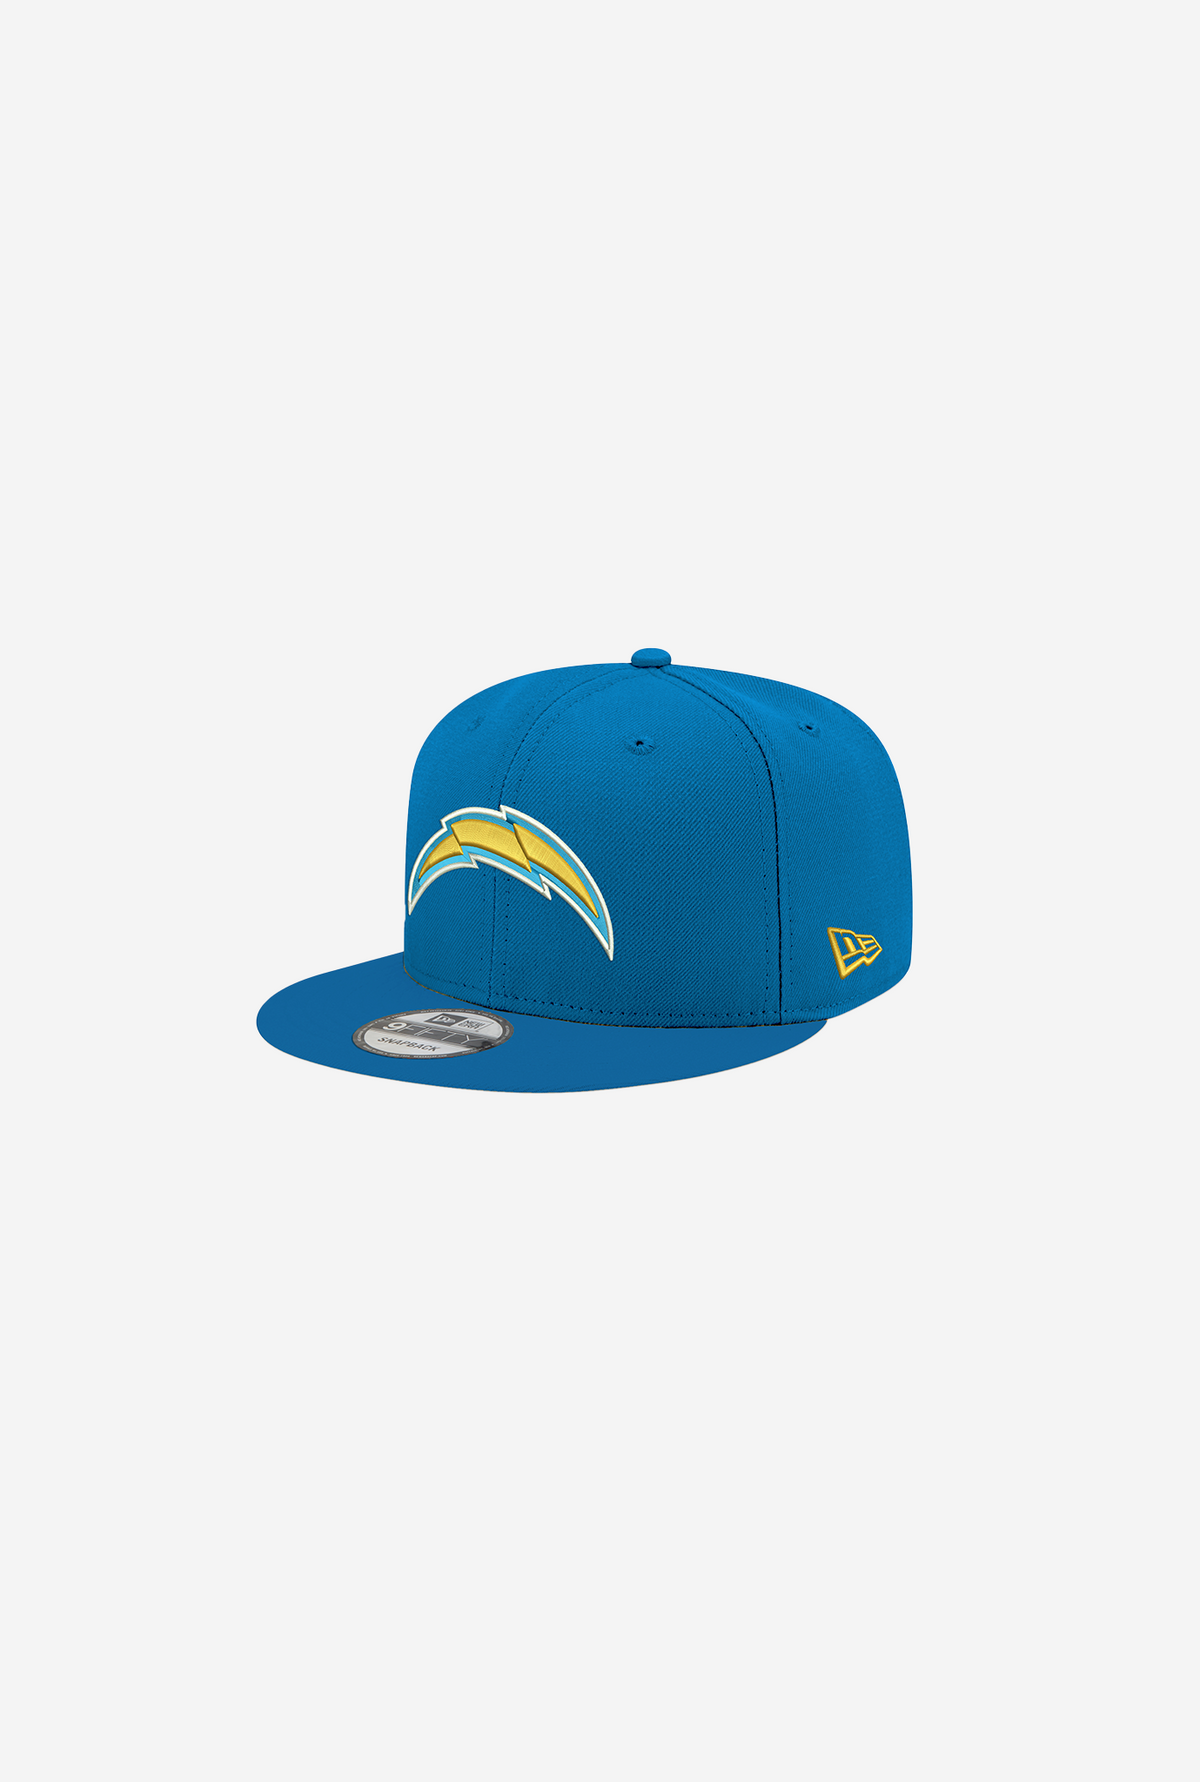 Los Angeles Chargers Basic 9FIFTY Snapback